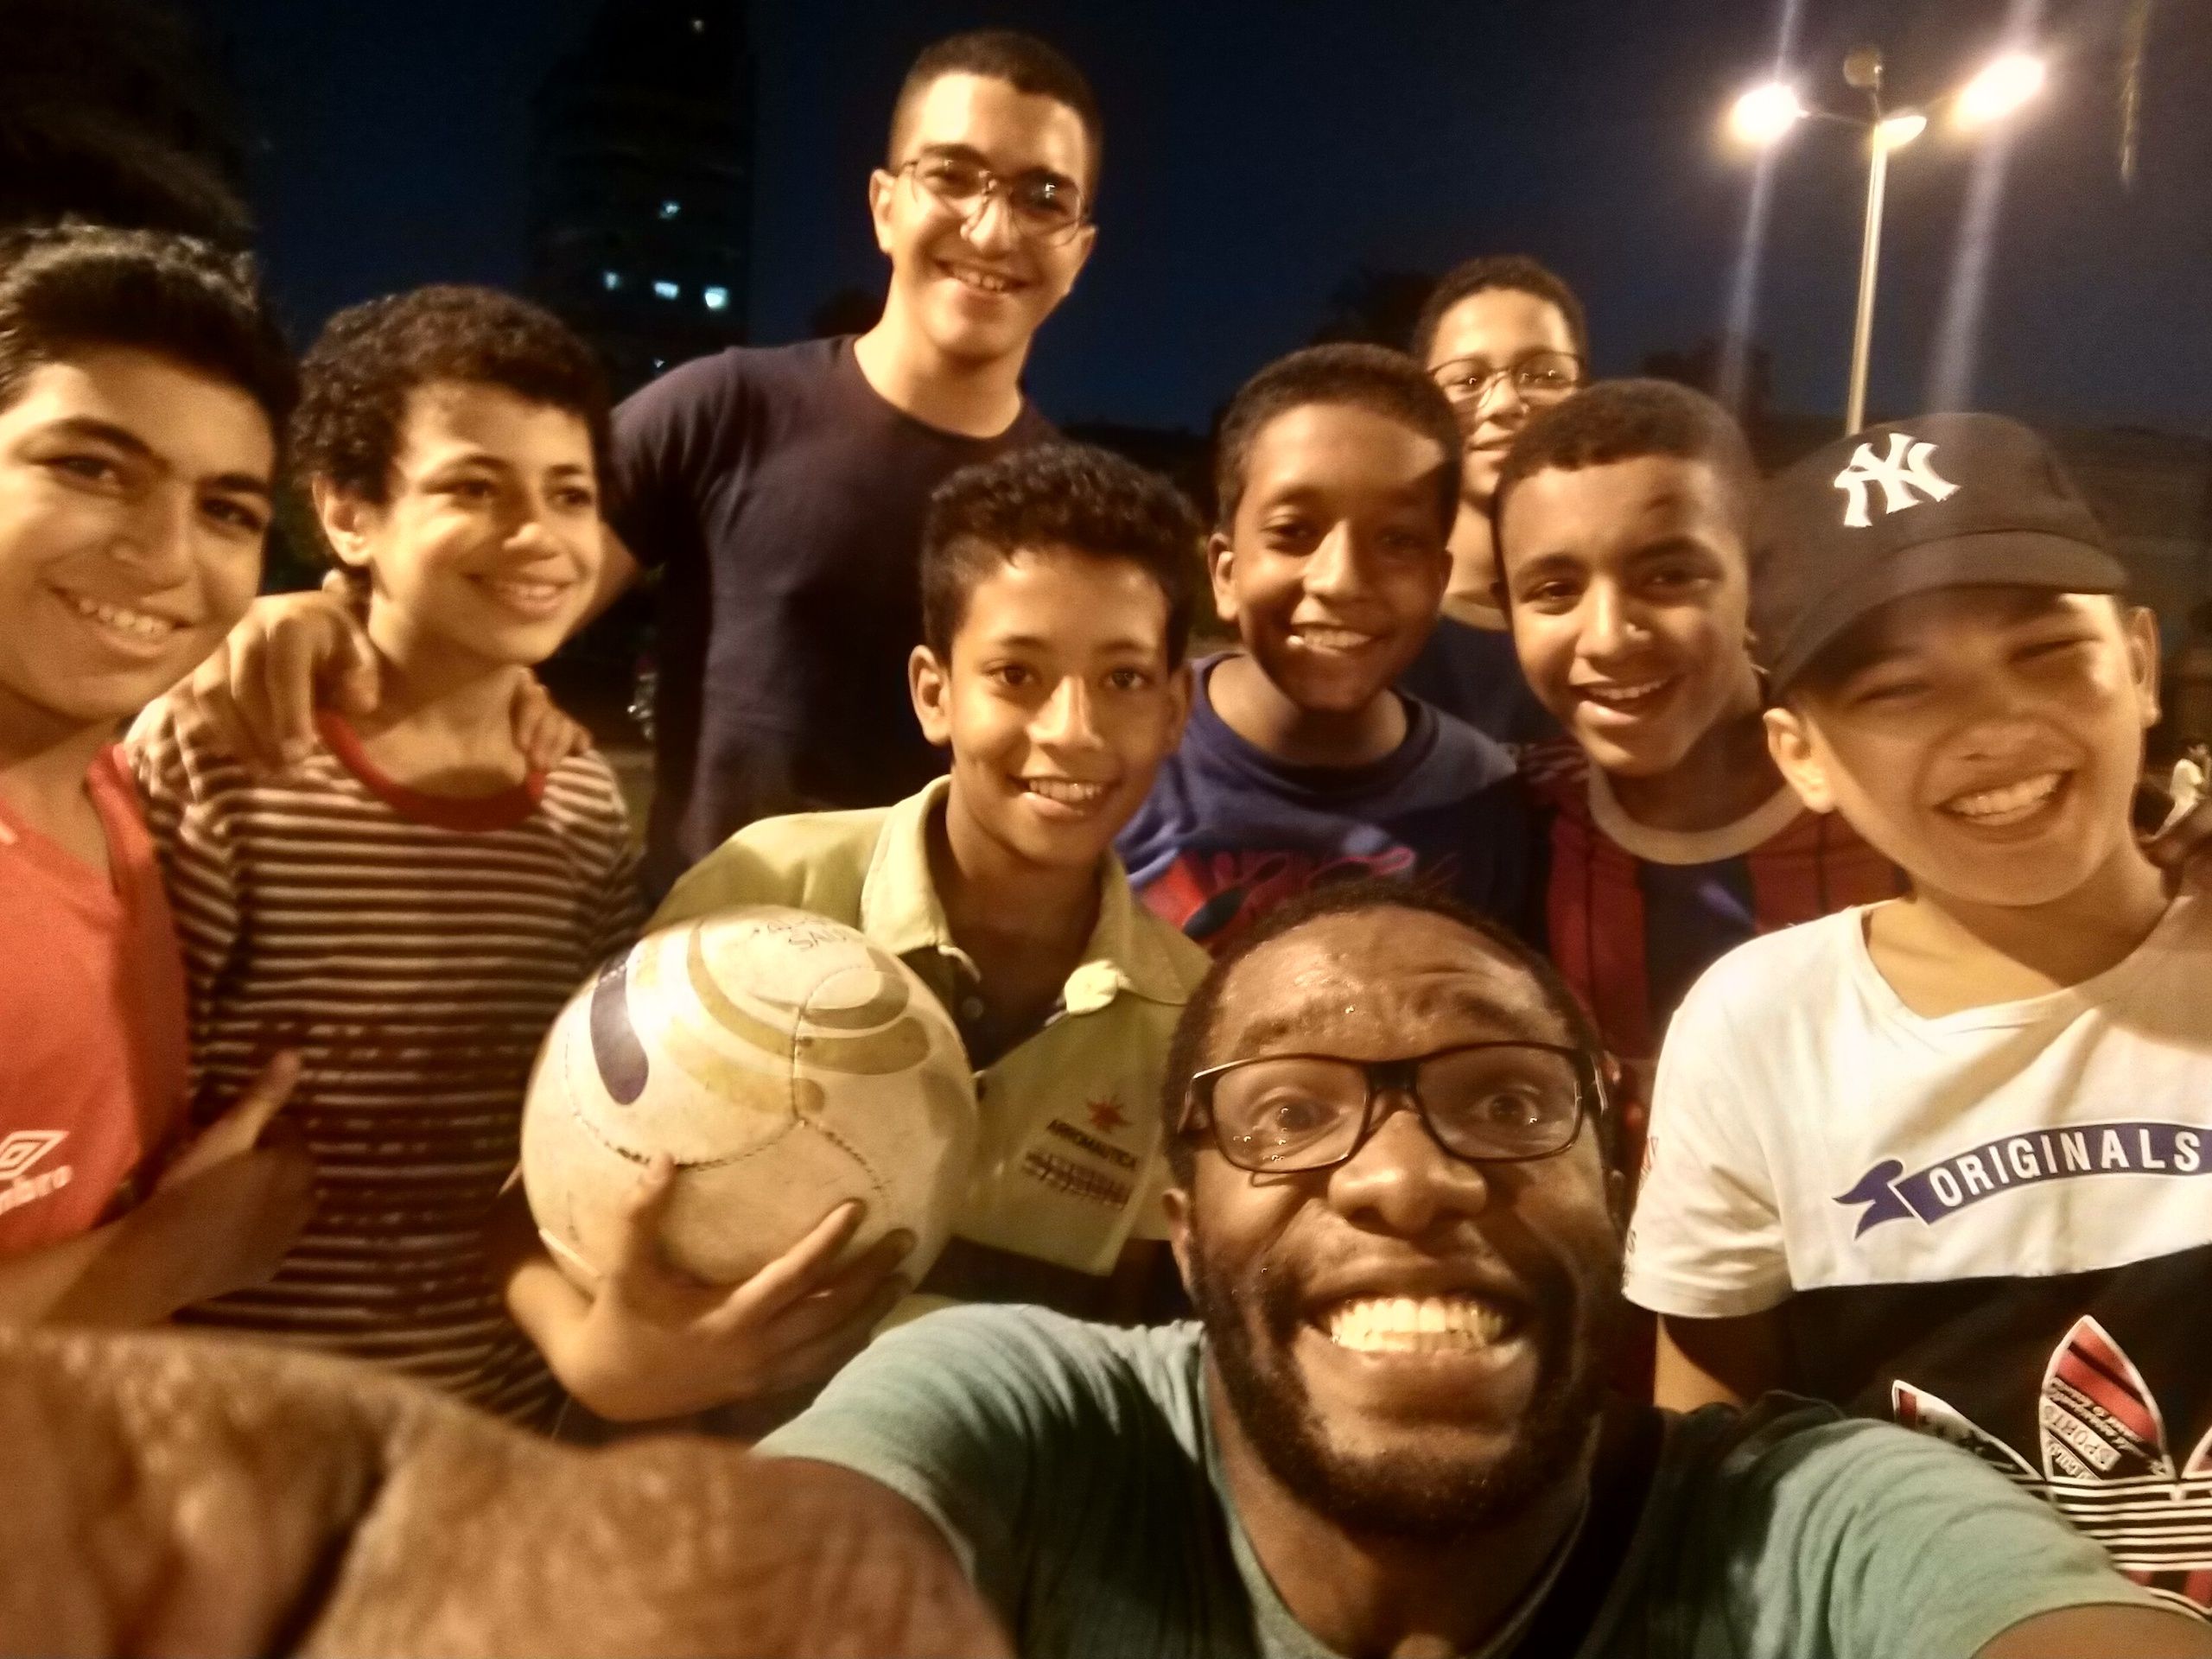 Post football photo photo at the park outside Abdeen Palace Museum. One of the kids wasn't too happy to see me join but at the end, he asked for us to take a group photo